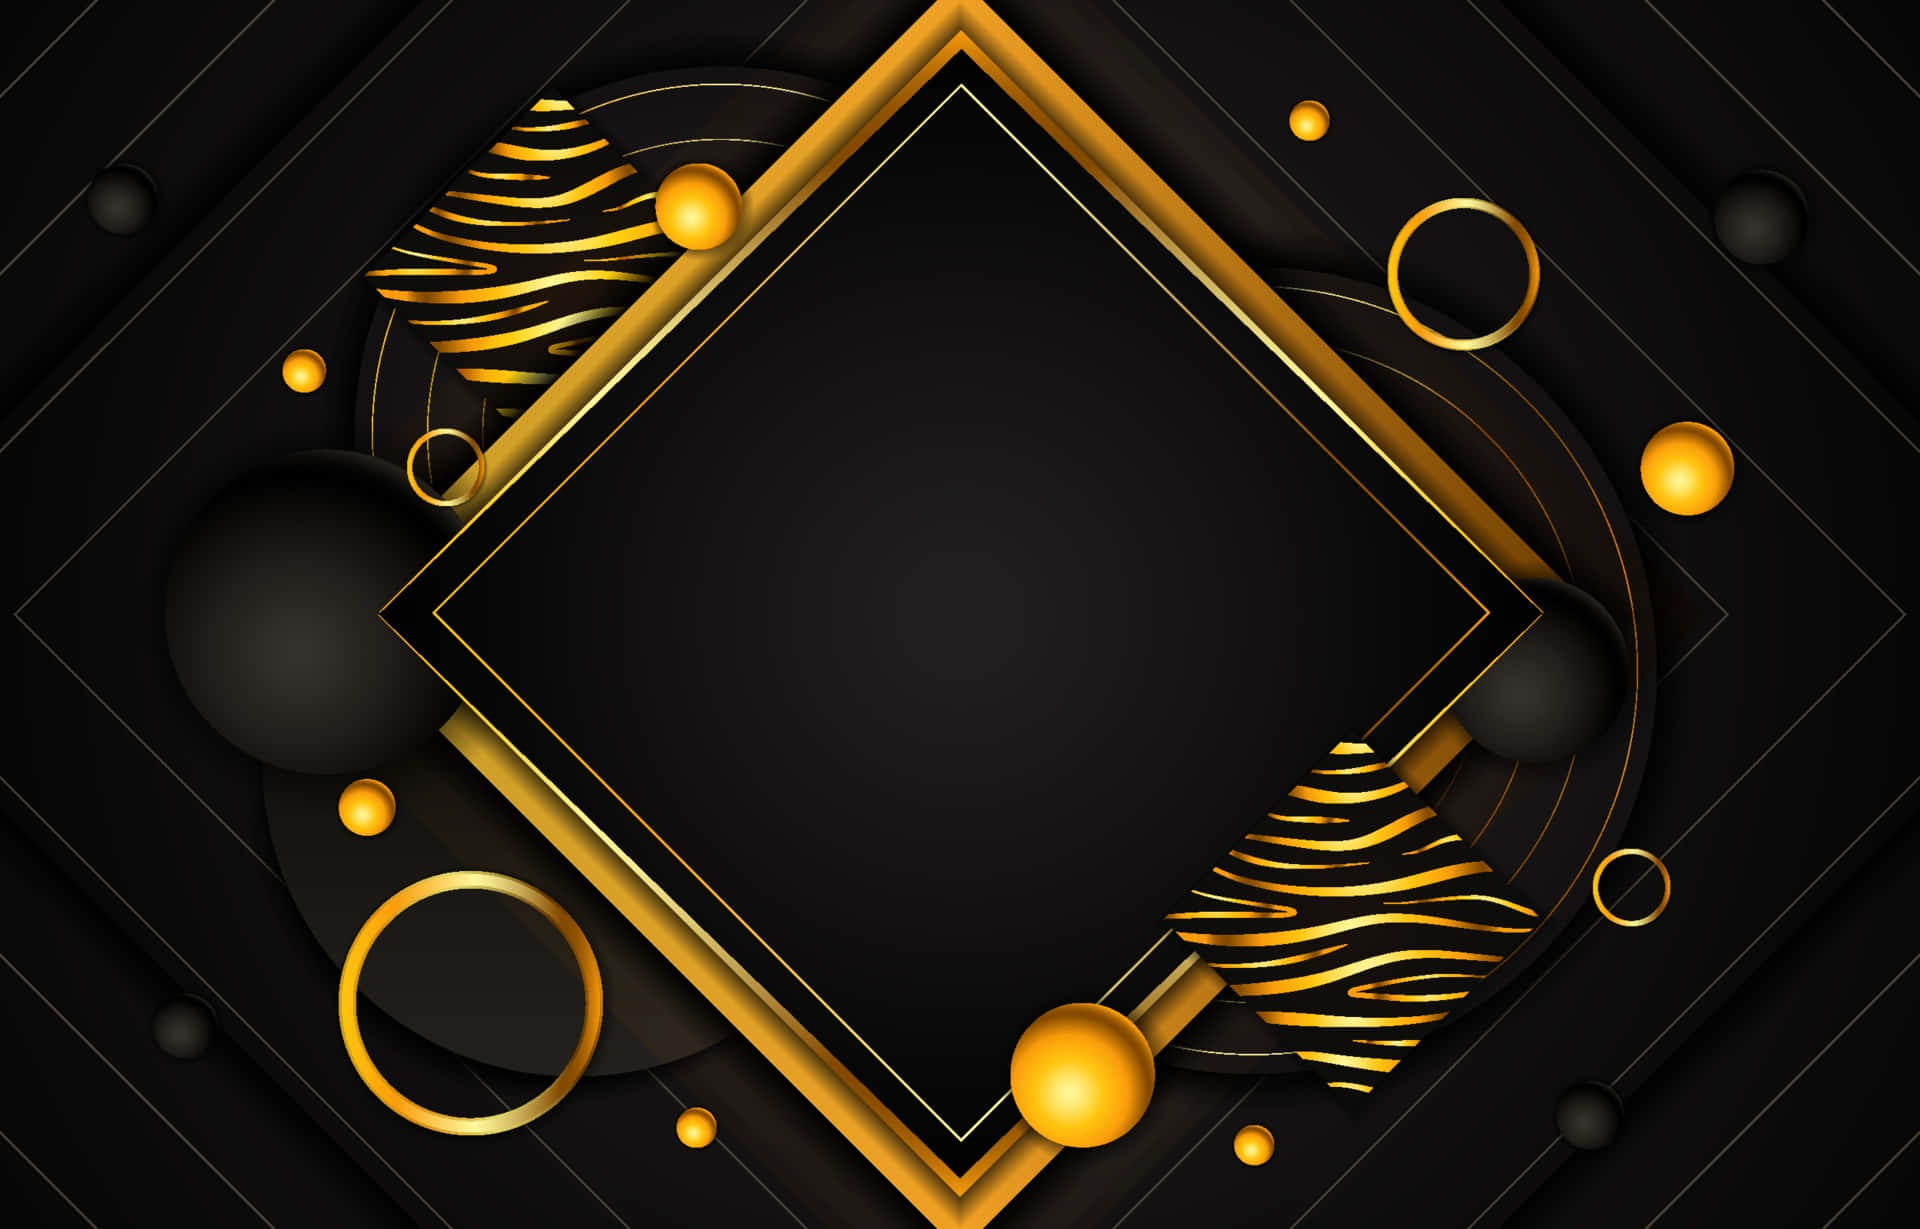 A Black Background With Gold Circles And Diamonds